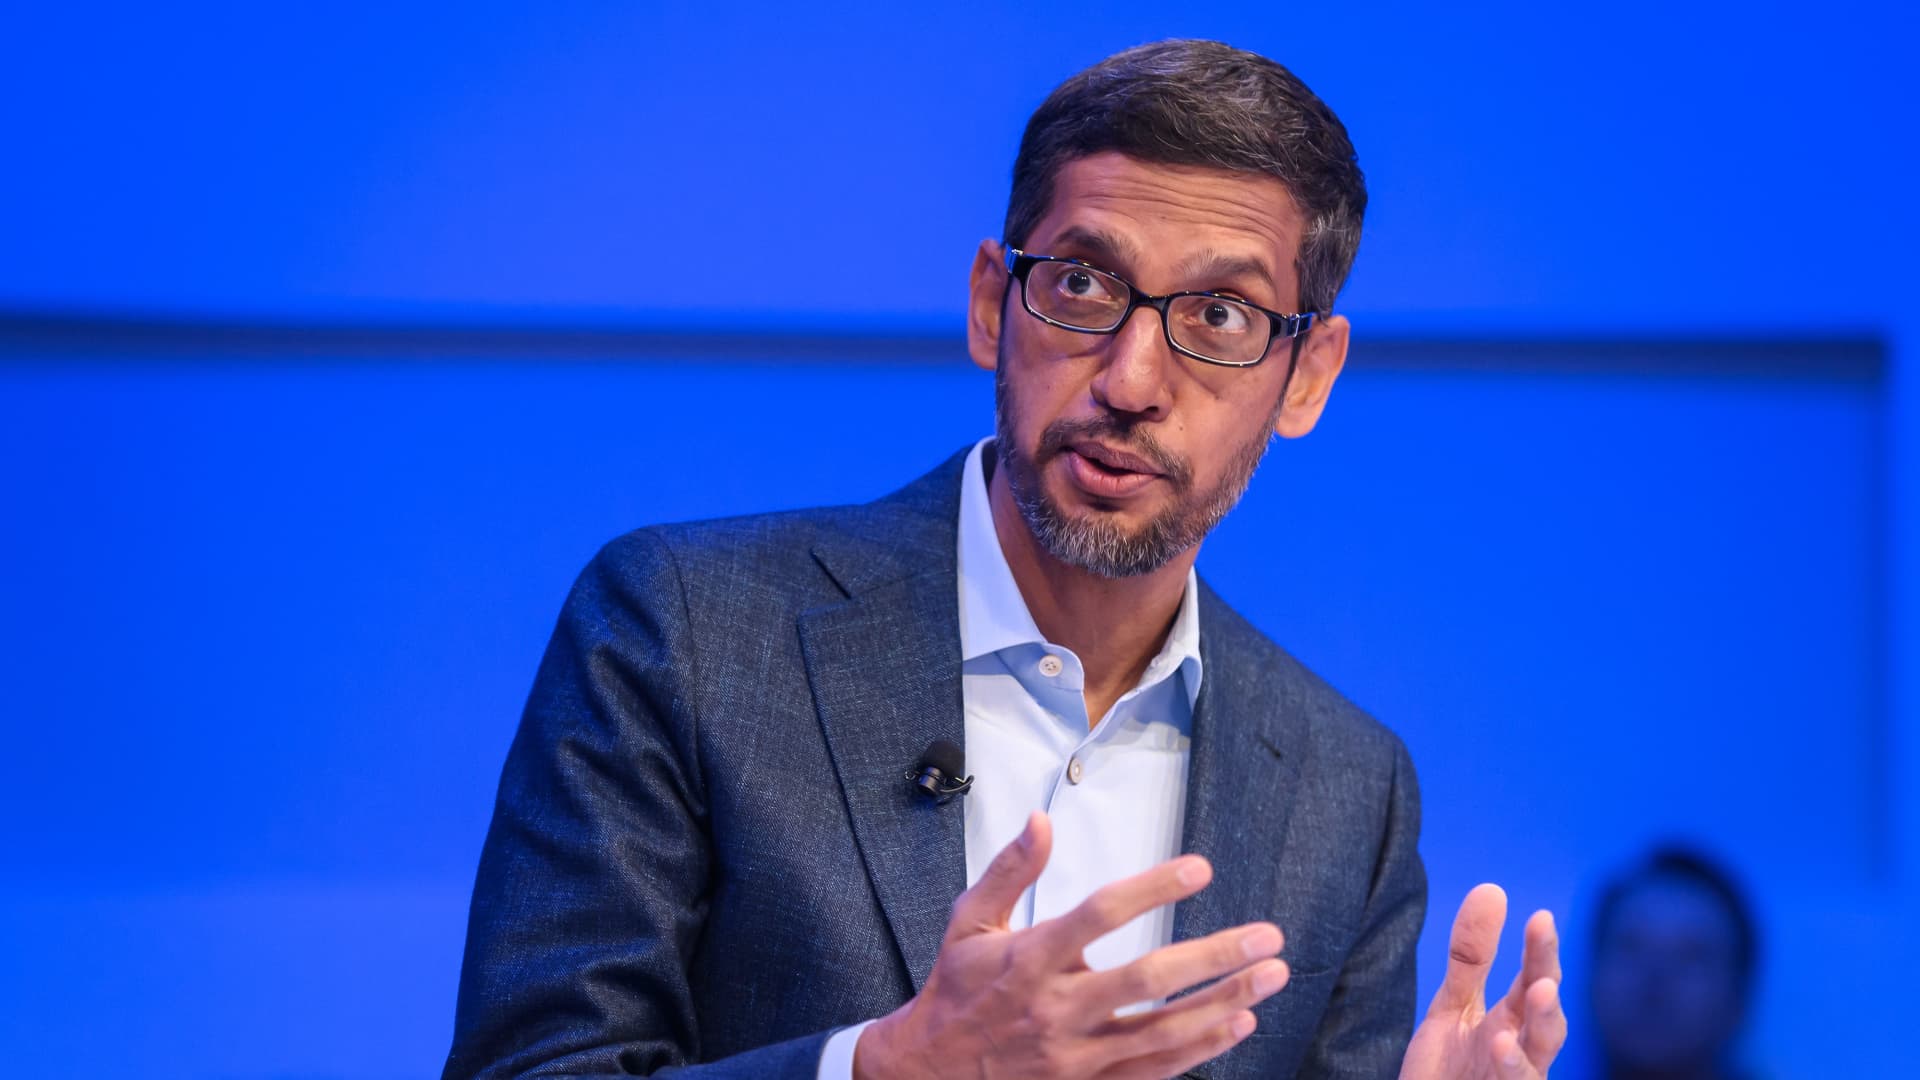 Google CEO talks up AI on earnings call as ChatGPT competition mounts